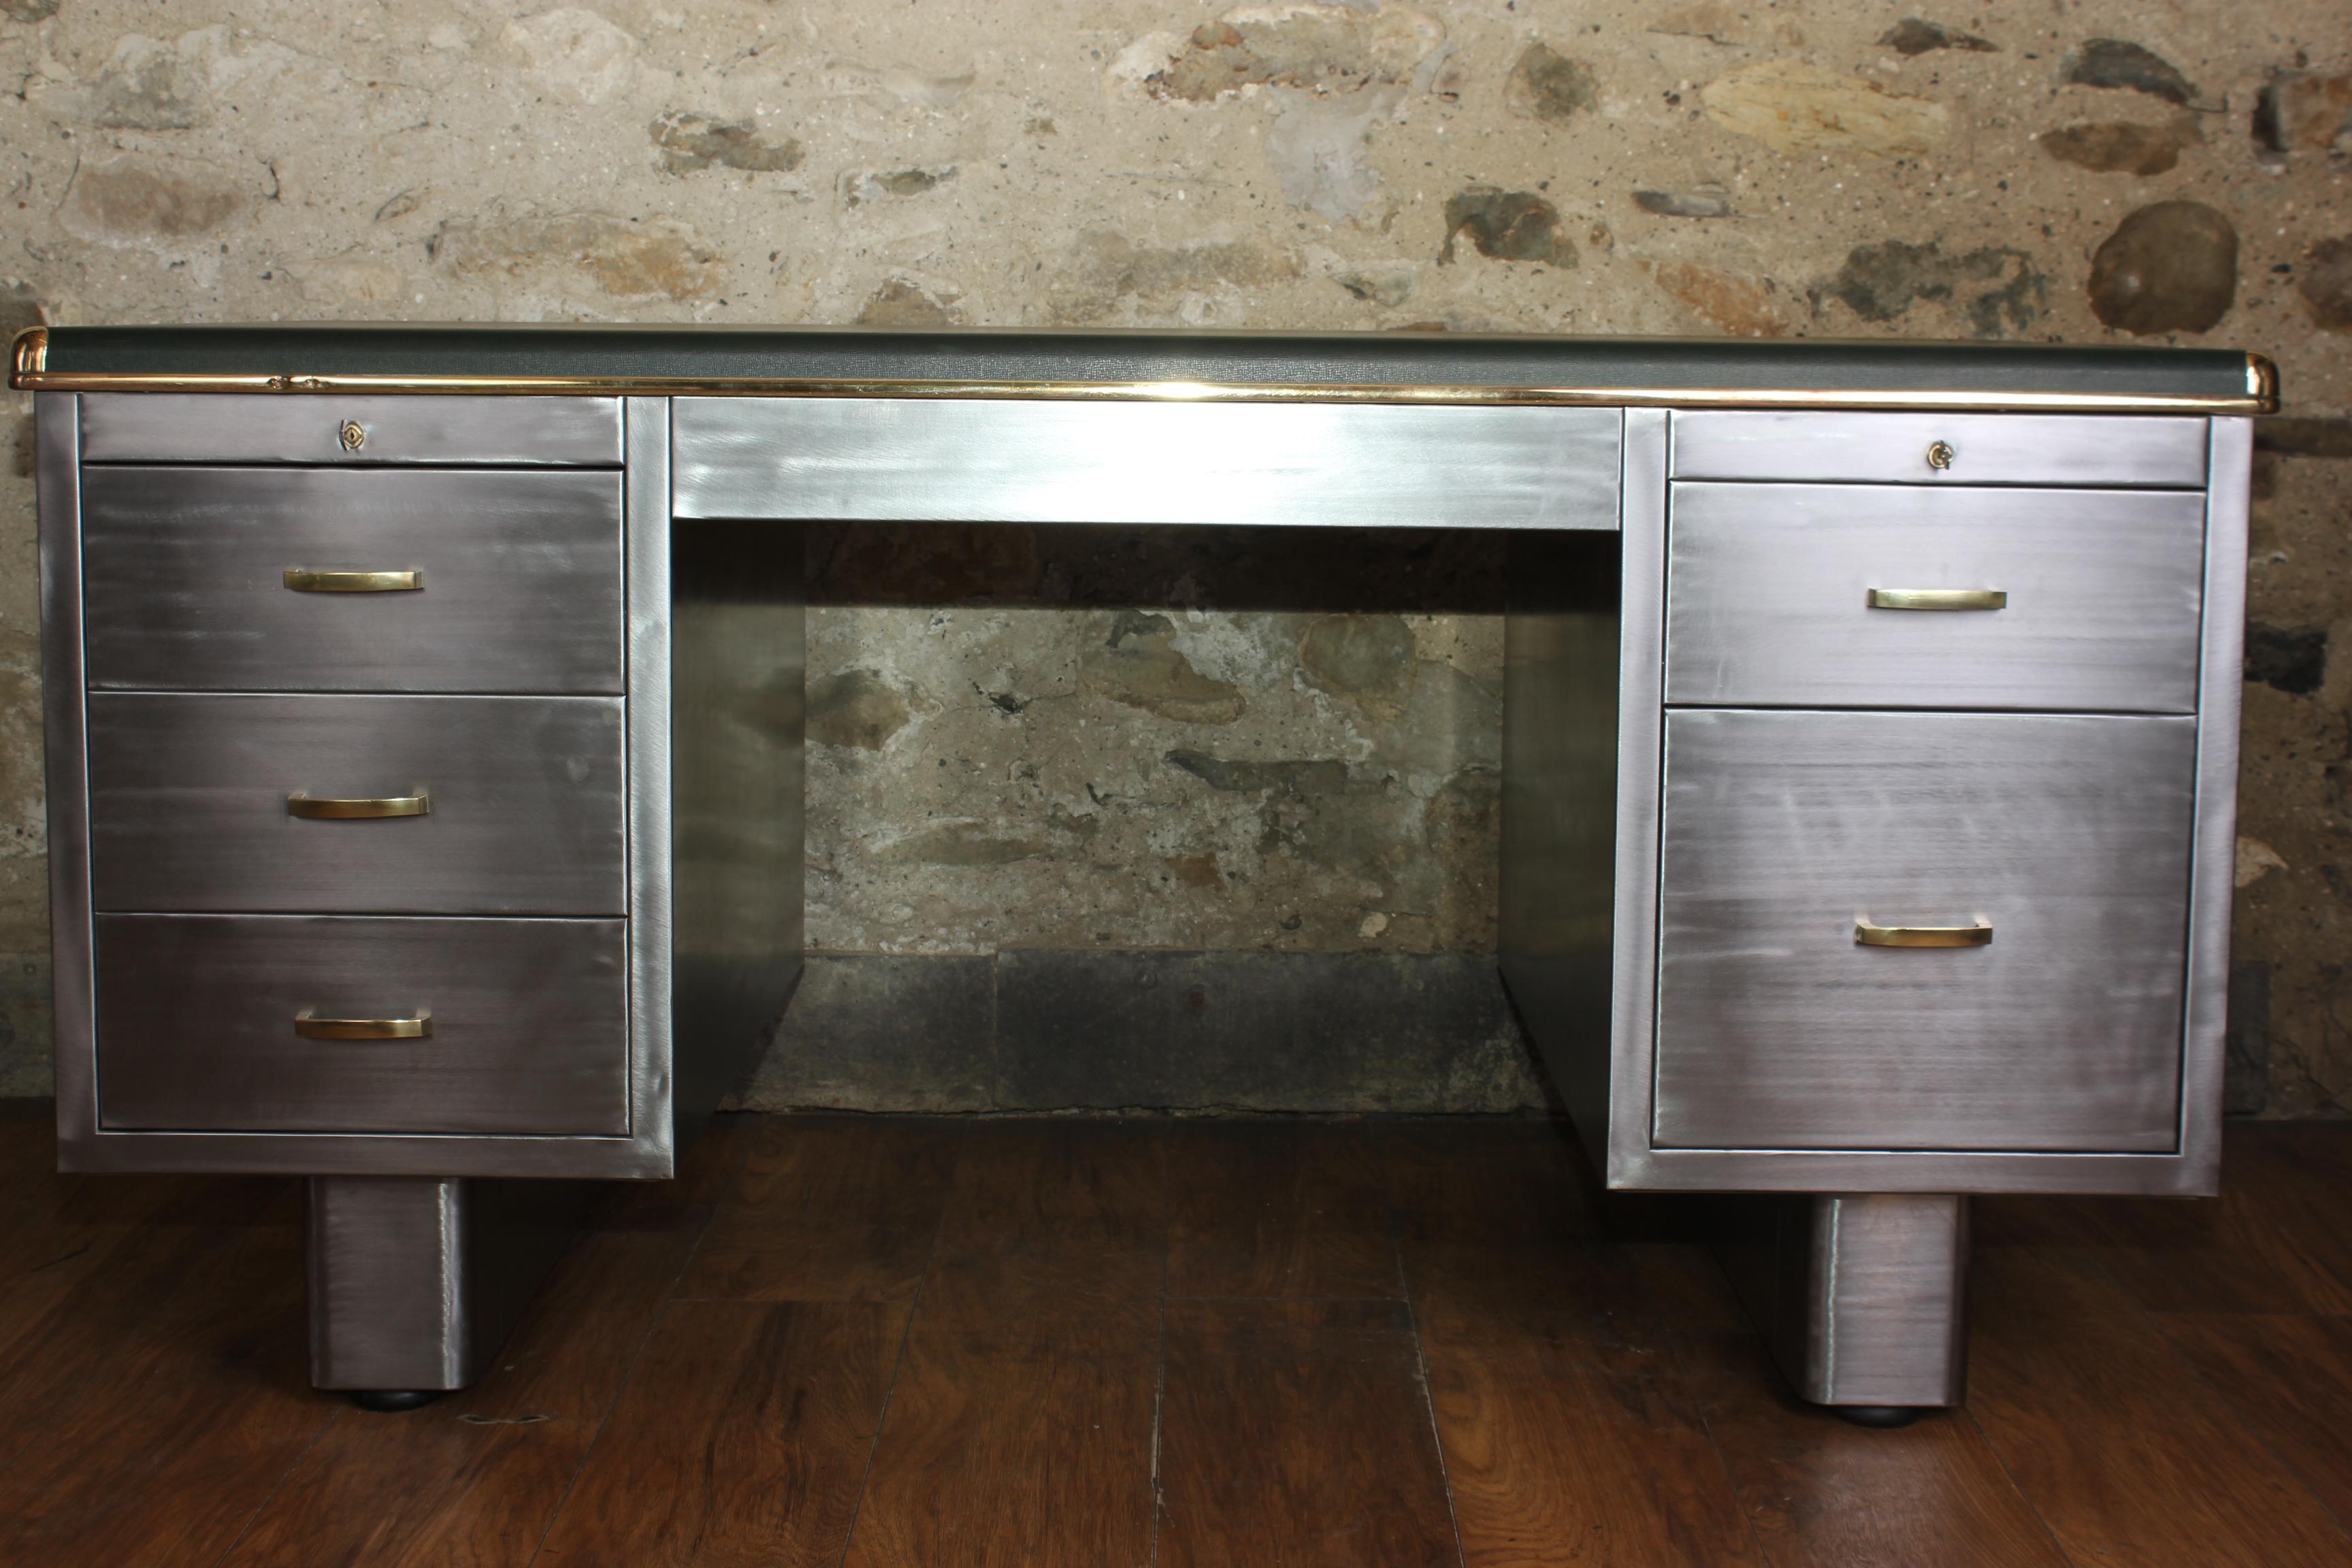 A exceptional vintage English stripped metal tanker desk with solid brass fittings circa 1940s. It has three drawers on one side and two drawers on the other which all run smoothly. It has been stripped back to bare metal on all sides so it can sit